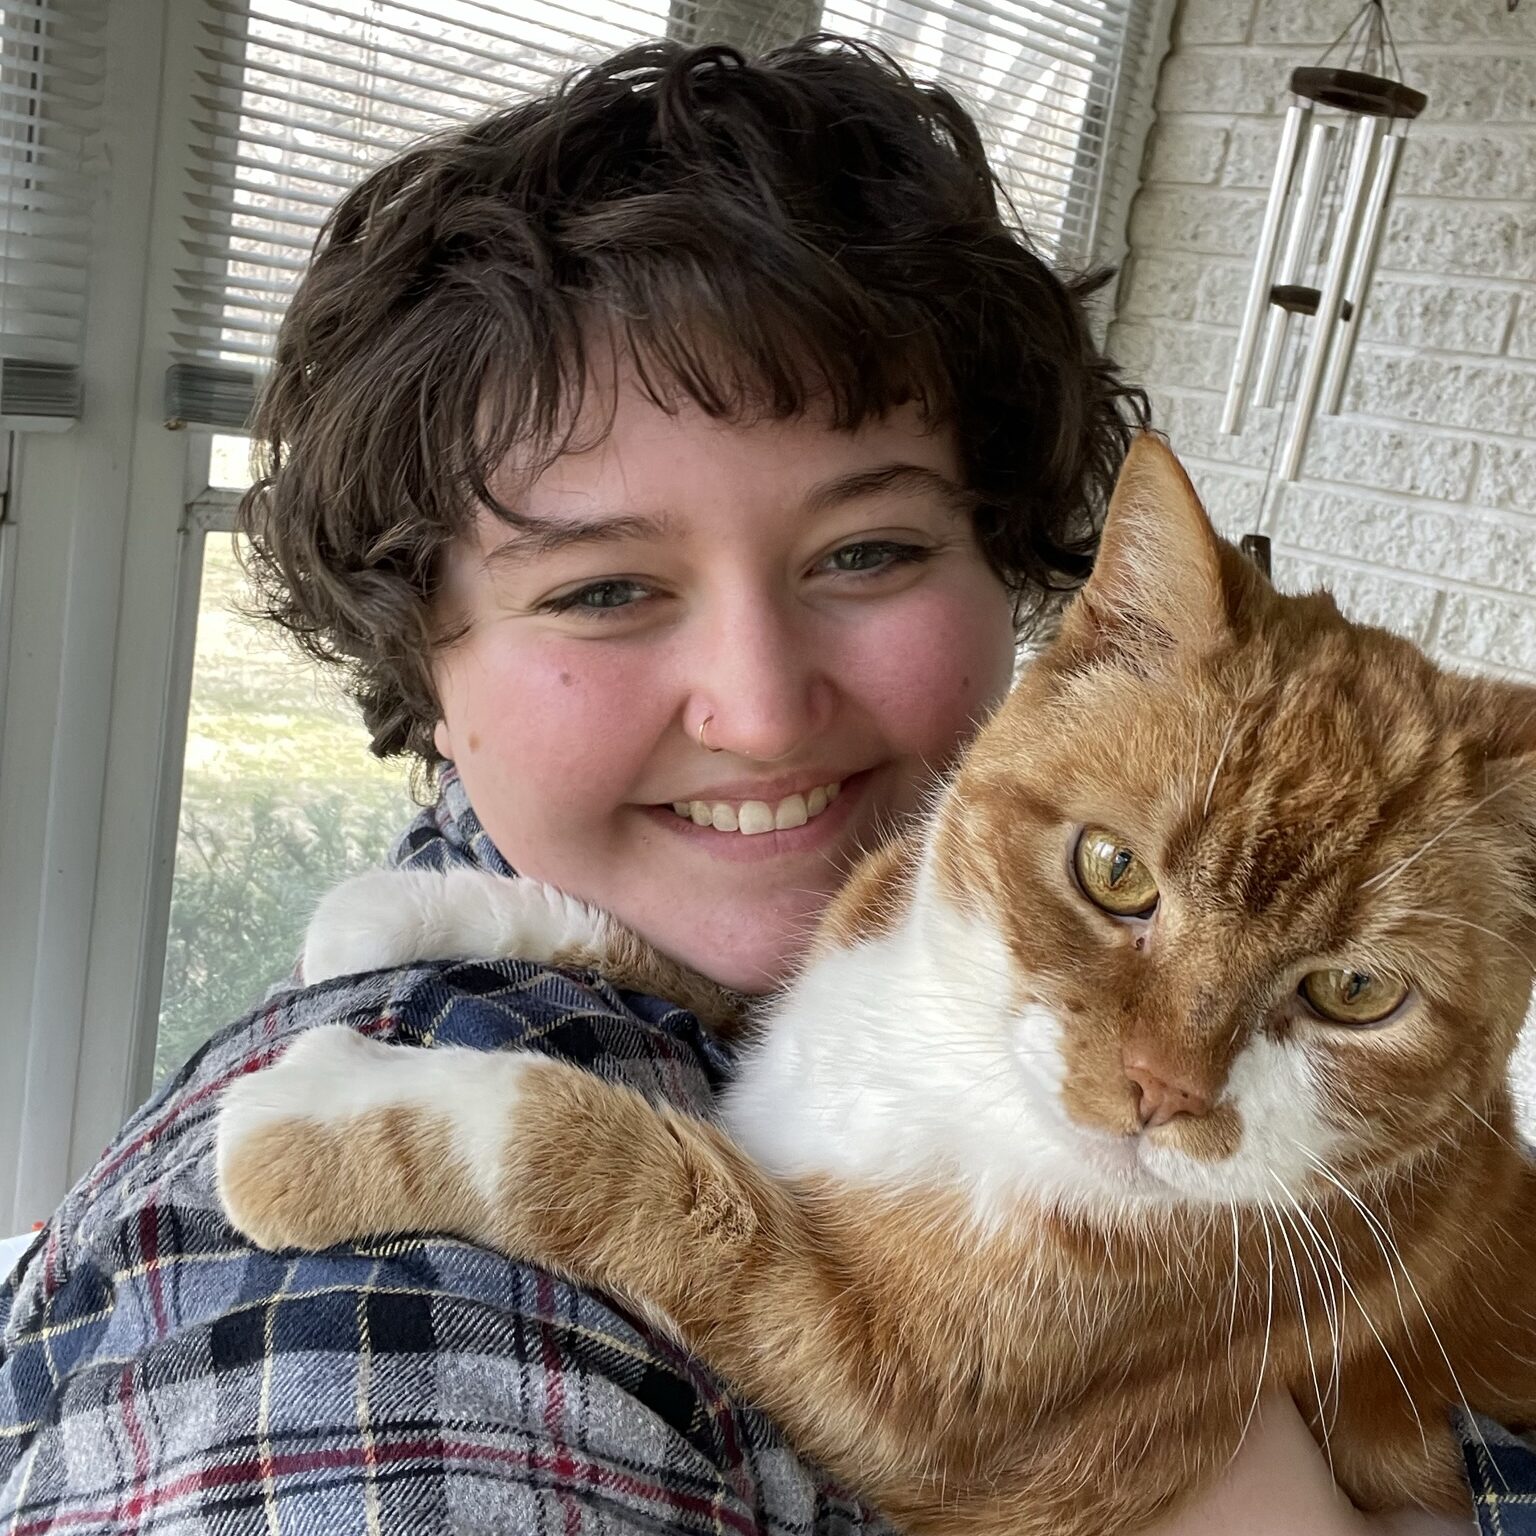 Fern Poling '25 poses with their cat, Toby, who seems to express anger with their narrowed amber eyes. 